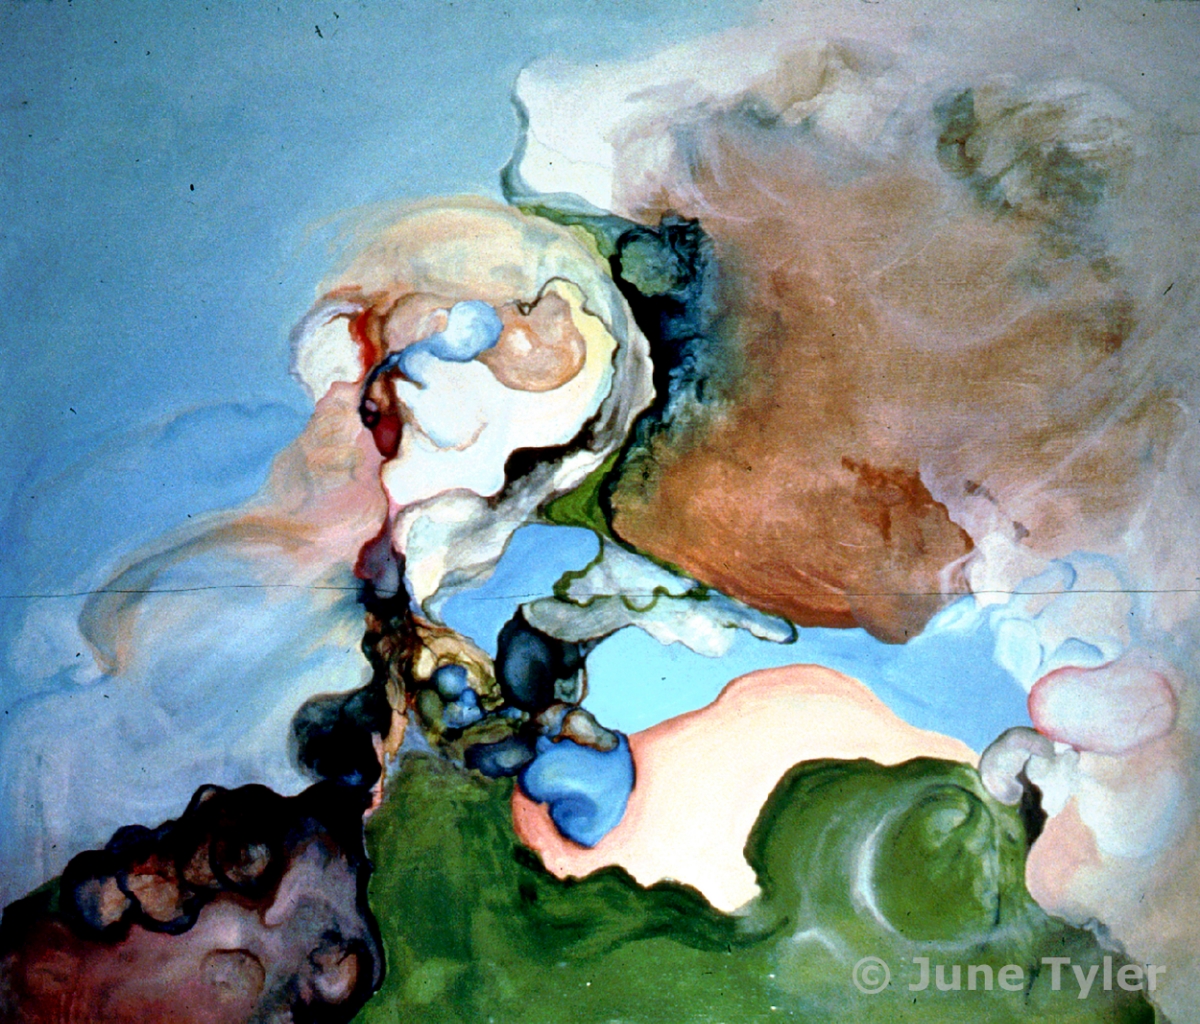  One of my earliest oils on canvas: "Flying Form Rooted," 1975. It is approximately 42" x 48"  I was a sophomore in undergrad school, when I began to develop a personal direction in art, experimenting with organic forms, color and space. My professor